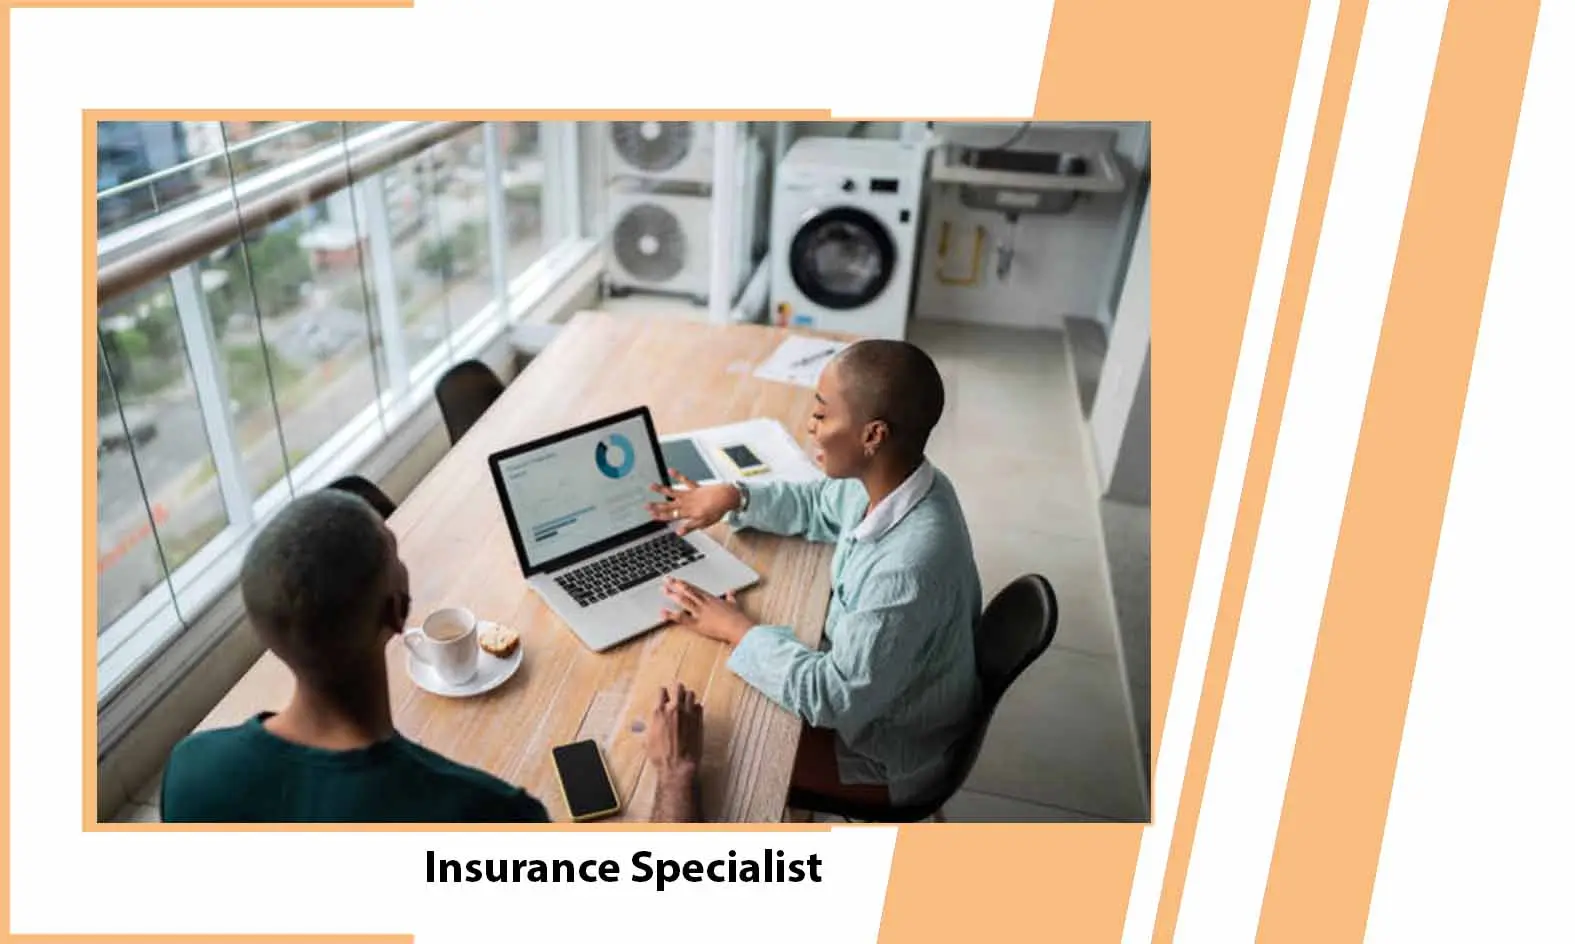 Insurance Specialist – Who is an Insurance Specialist